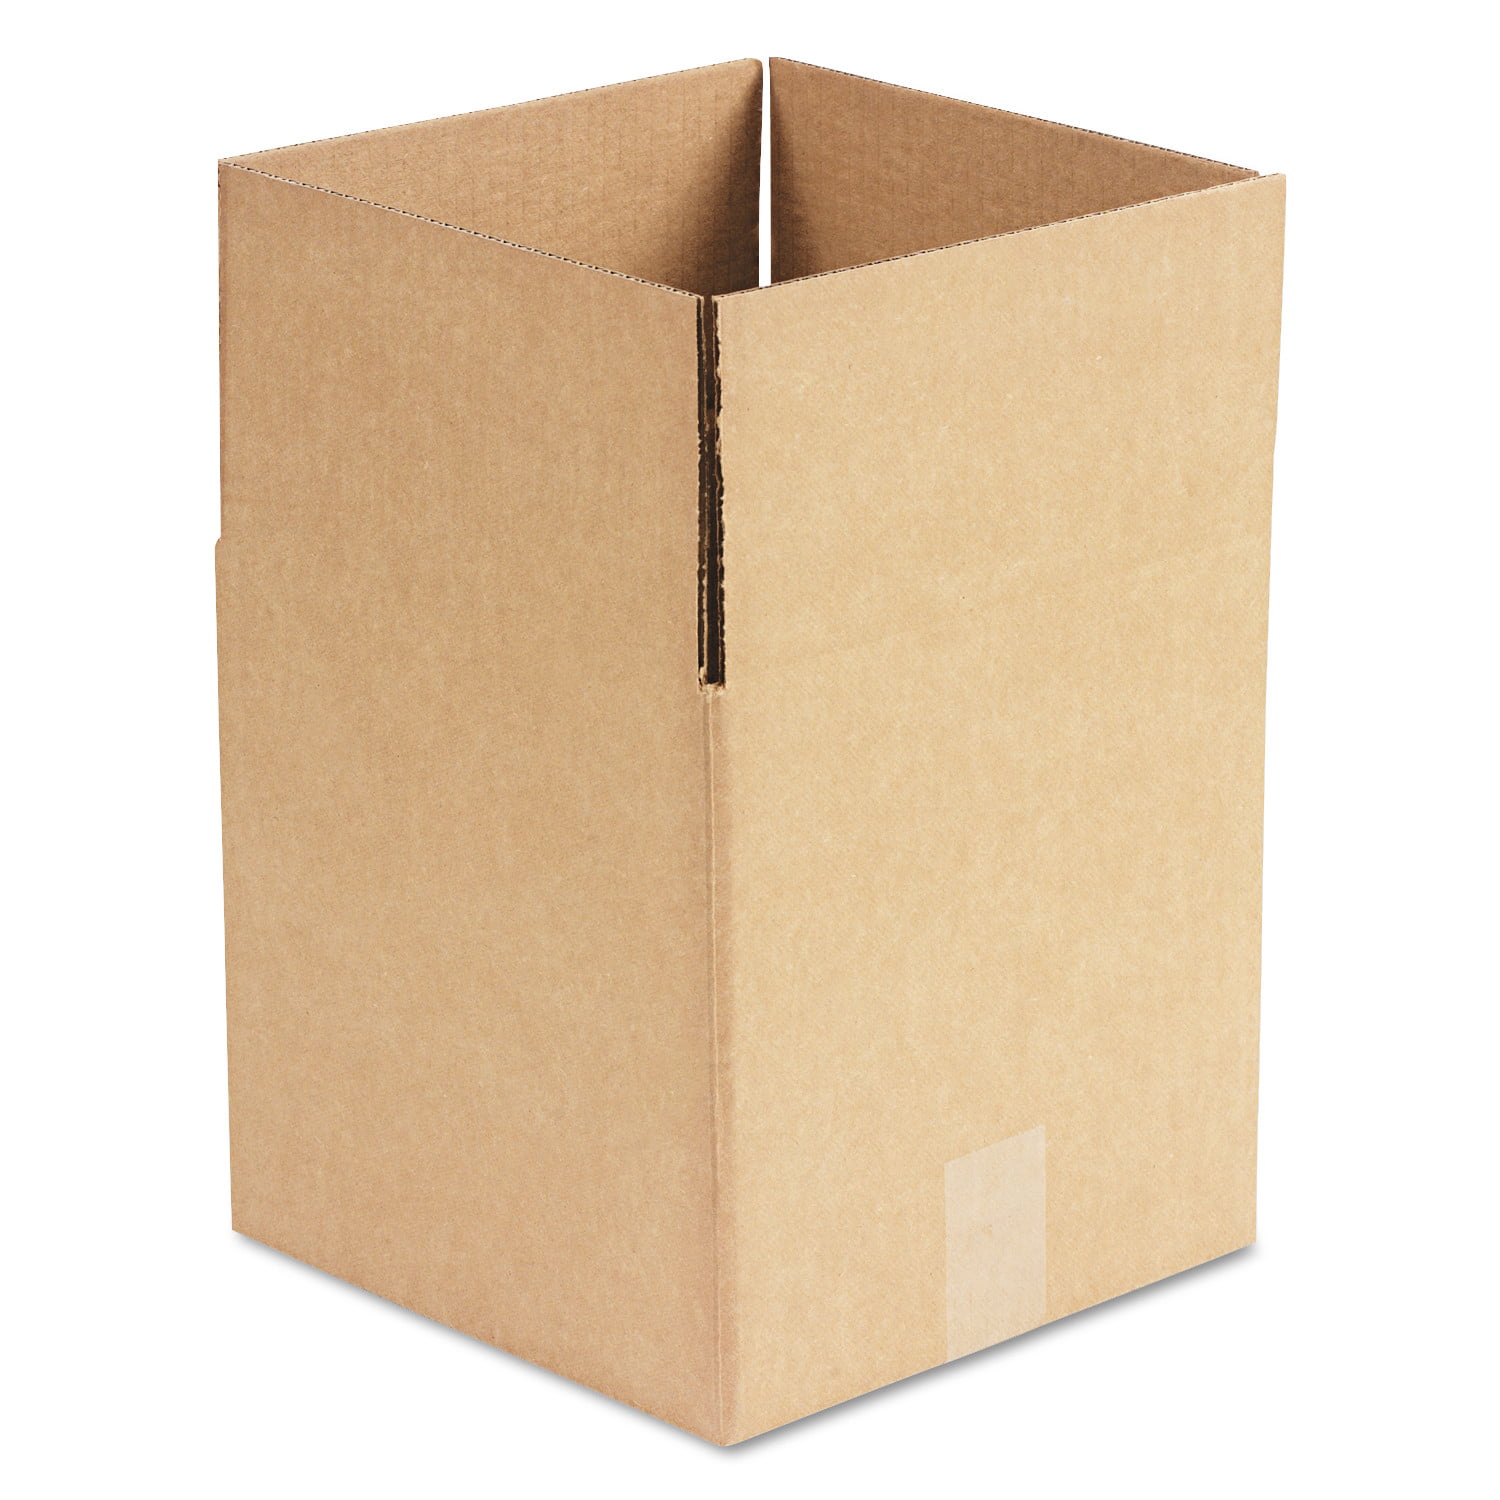 9x5x5 Shipping Moving Packing Boxes 25 ct